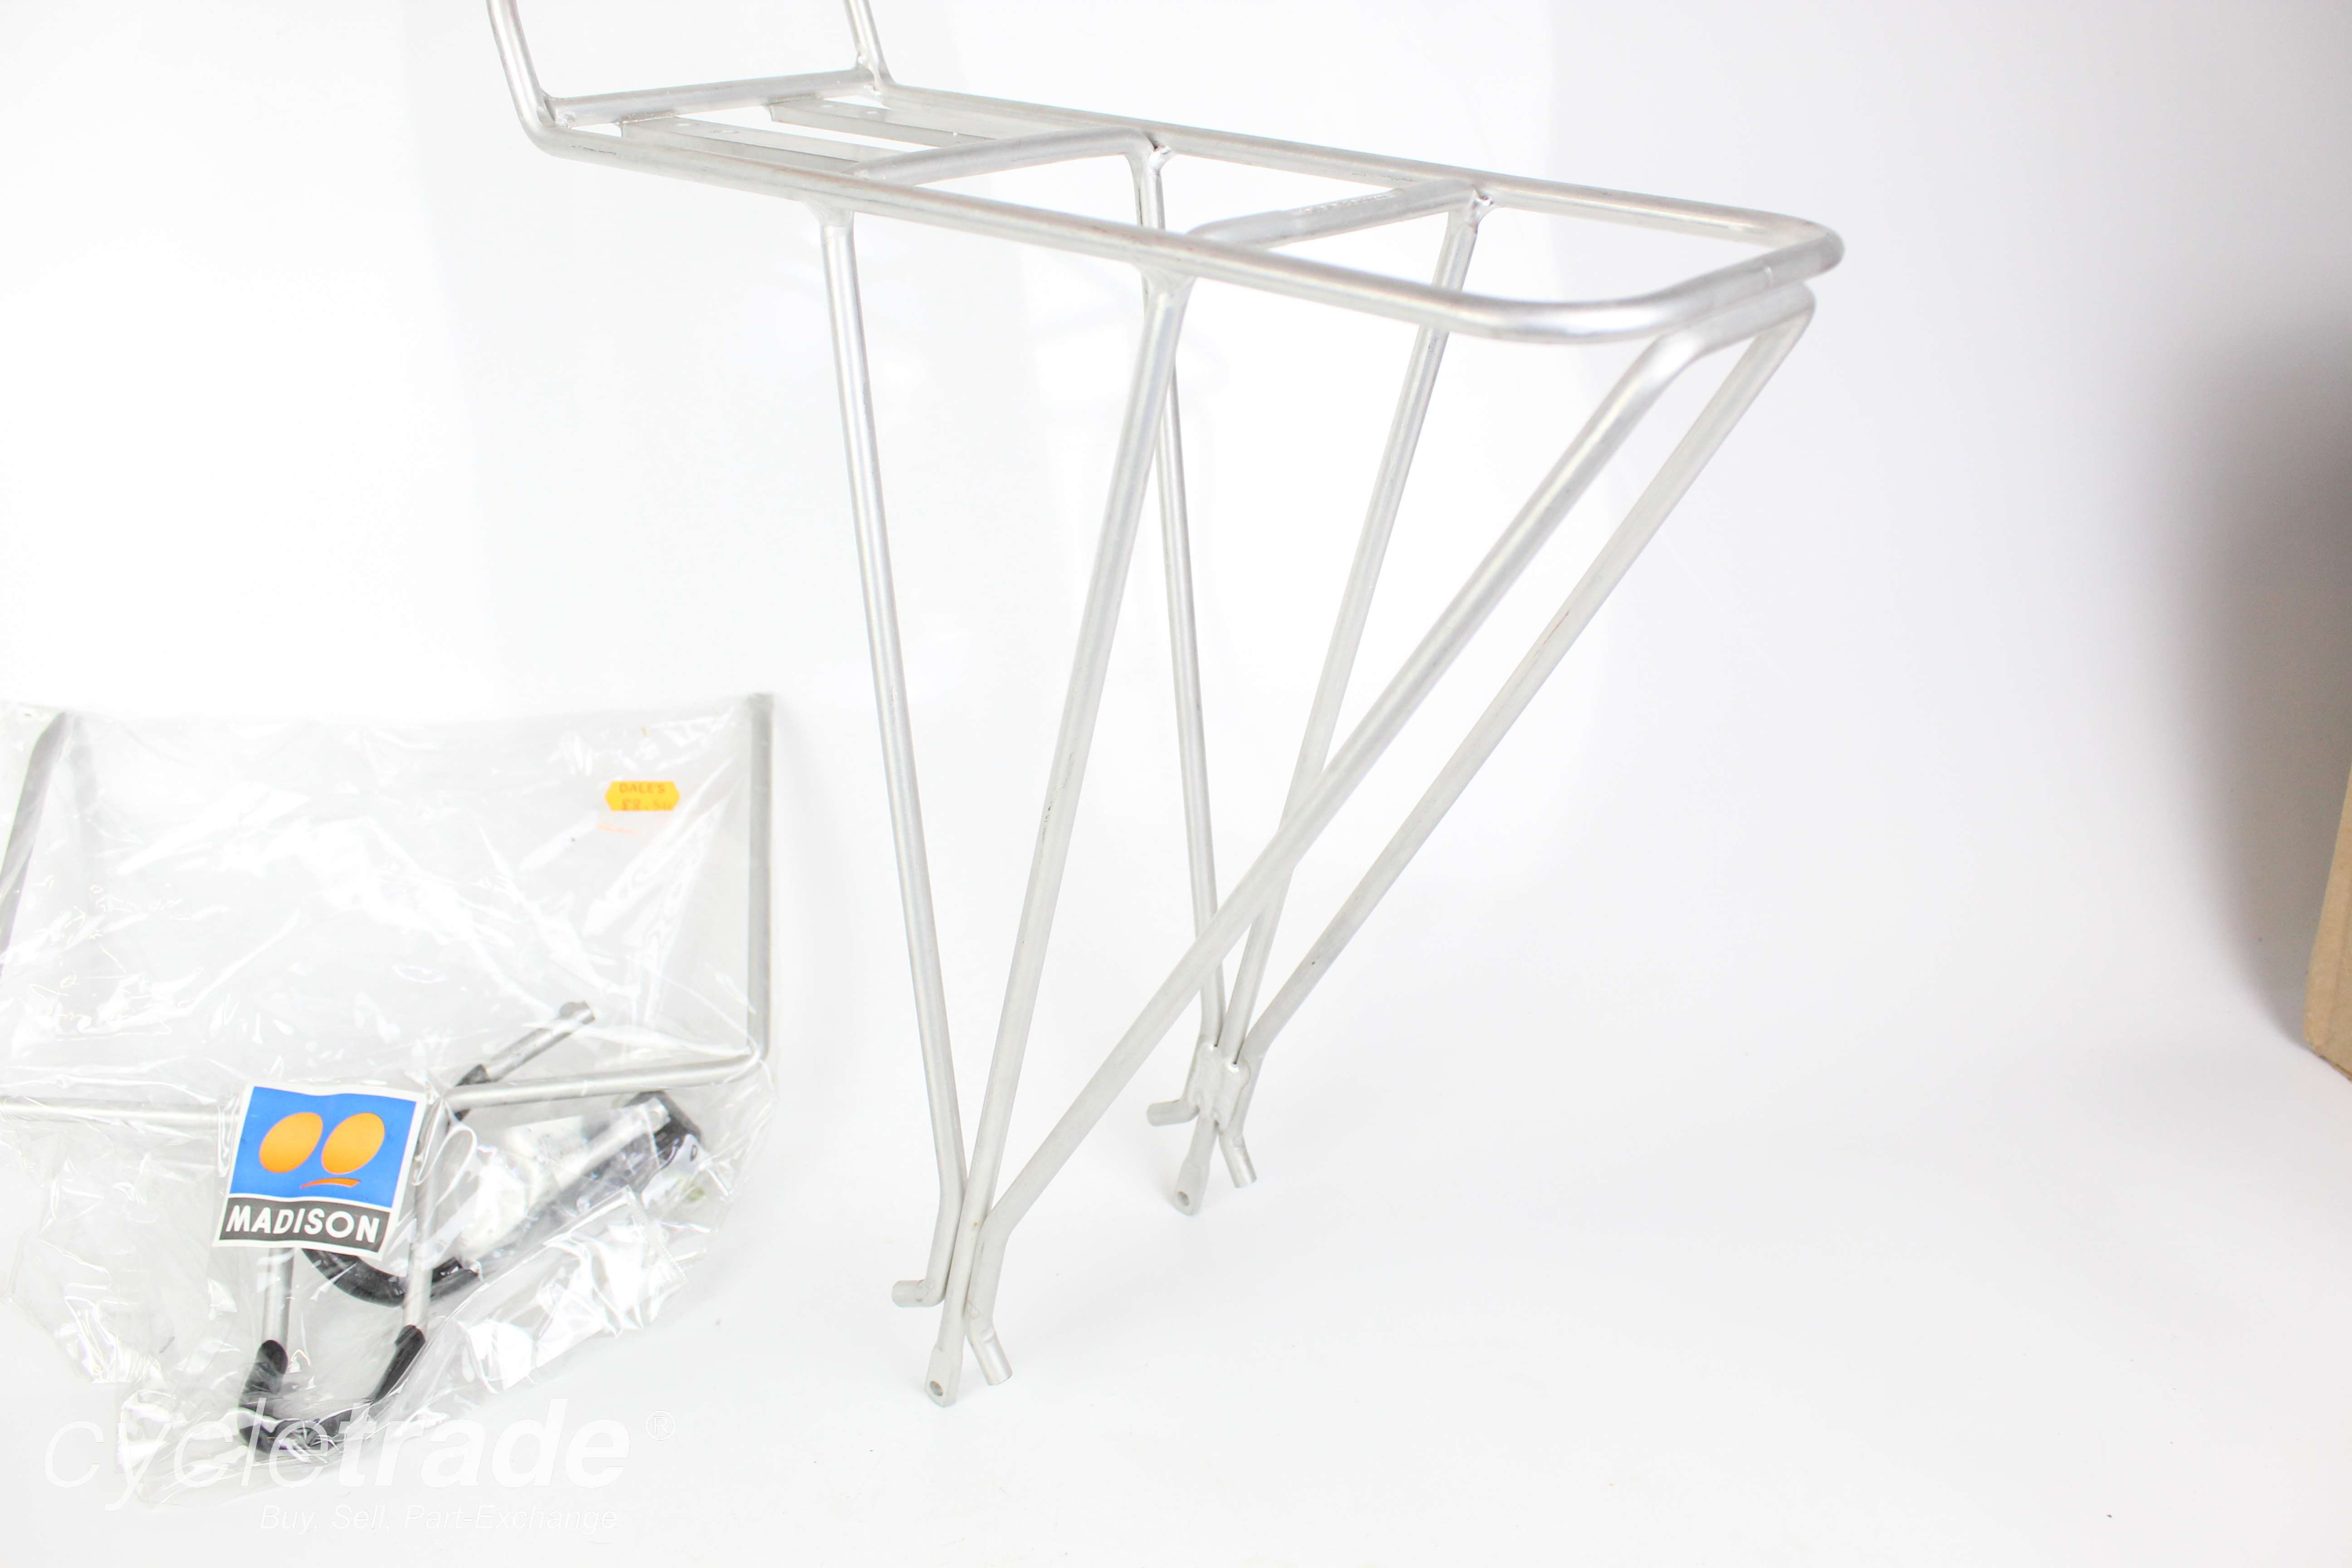 Pannier Rack - Madison up to 700c - Grade A+